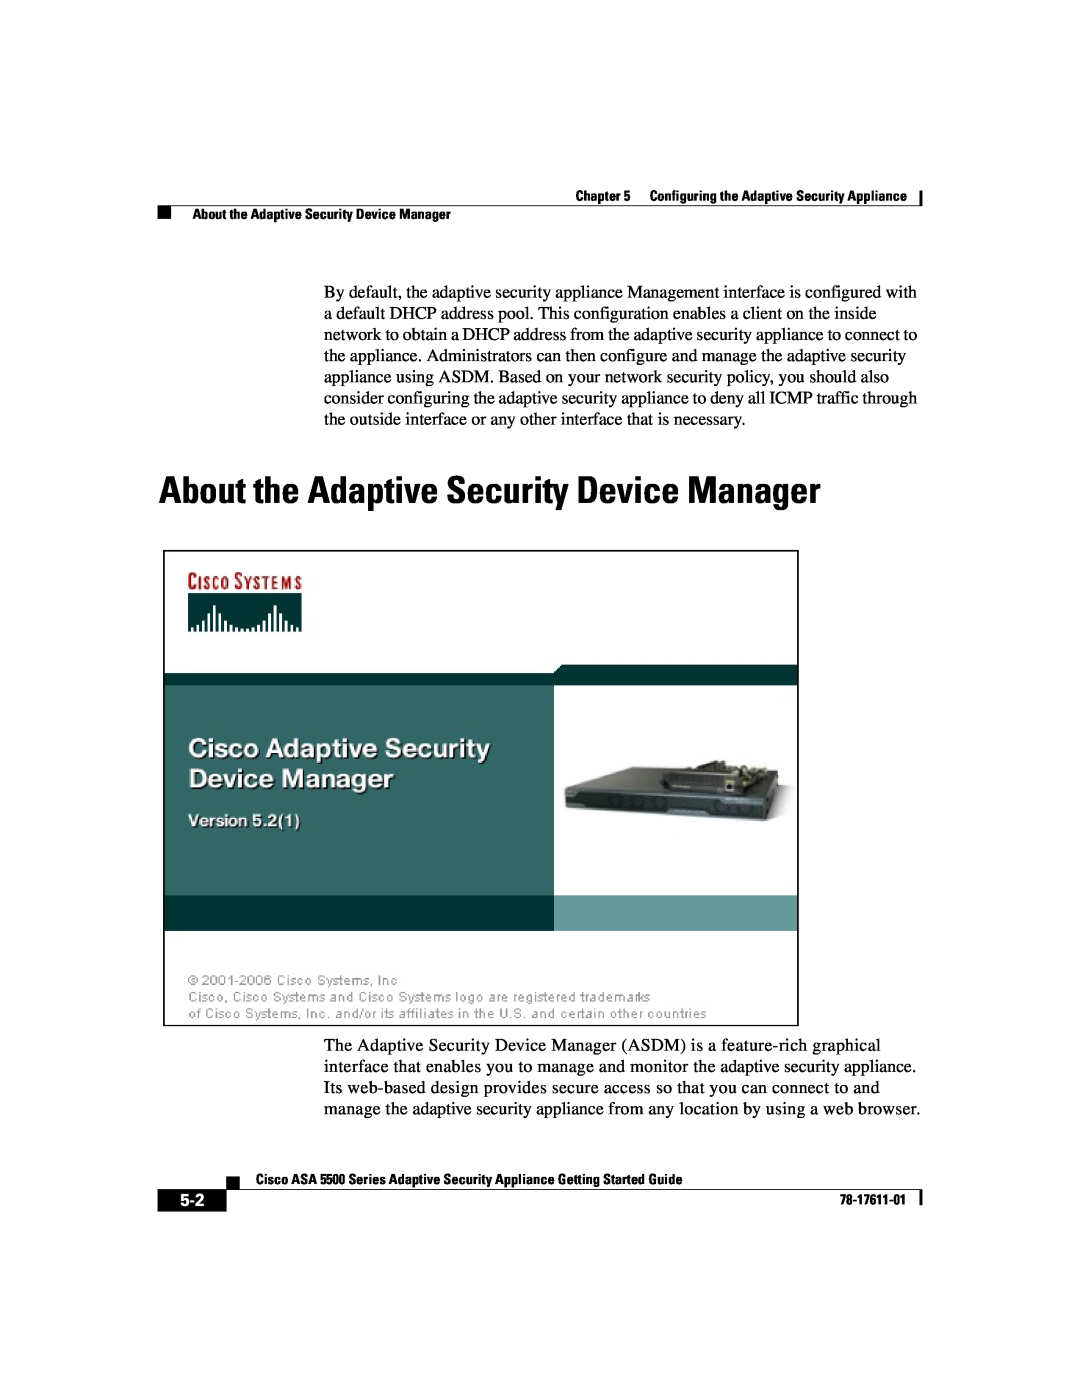 Cisco Systems ASA 5500 manual About the Adaptive Security Device Manager, 78-17611-01 